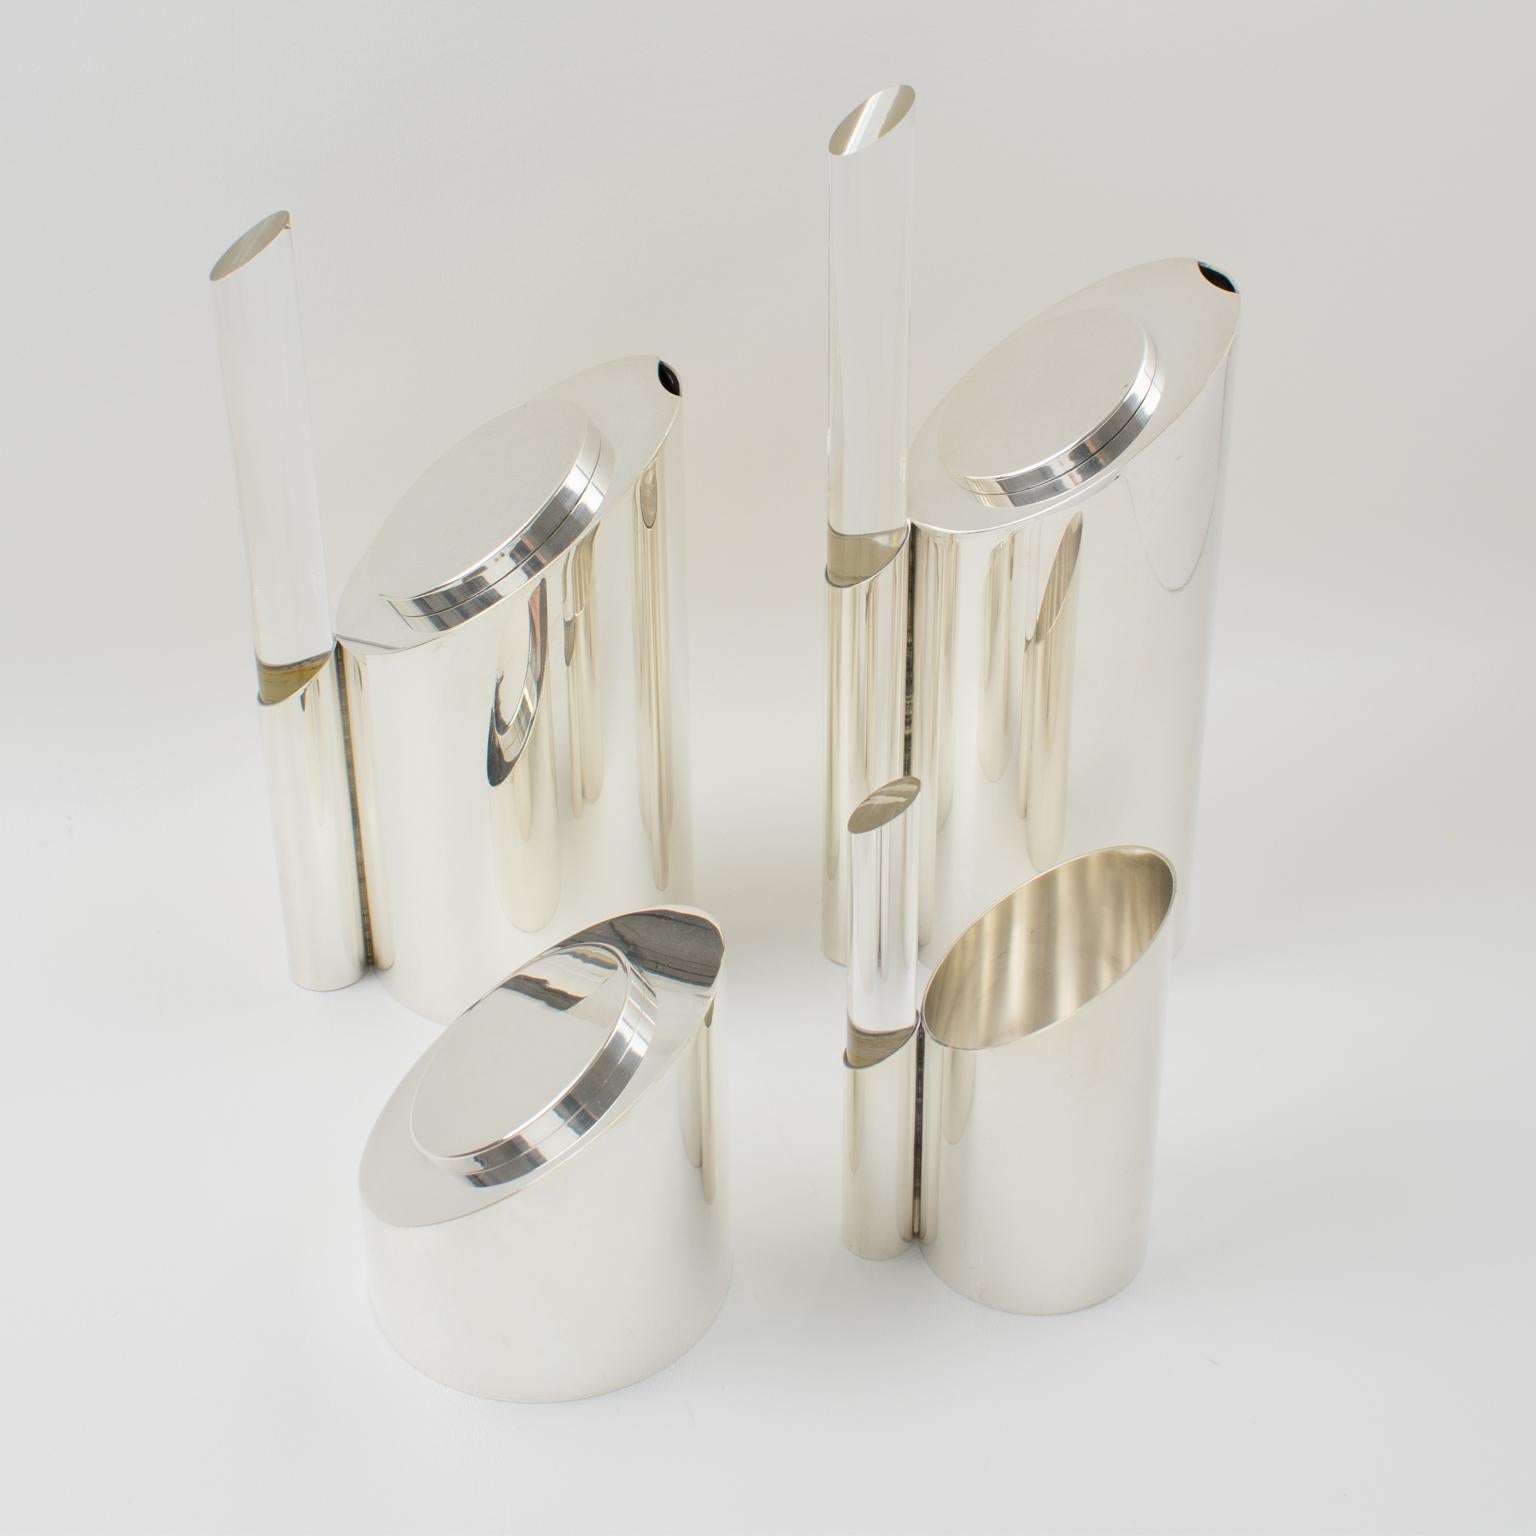 A sophisticated French modernist Memphis-style coffee or tea serving set. The set features a coffee pot, teapot, creamer, and sugar pot with a sculptural polished silver plate metal body and clear Lucite or acrylic thick rod handles. This